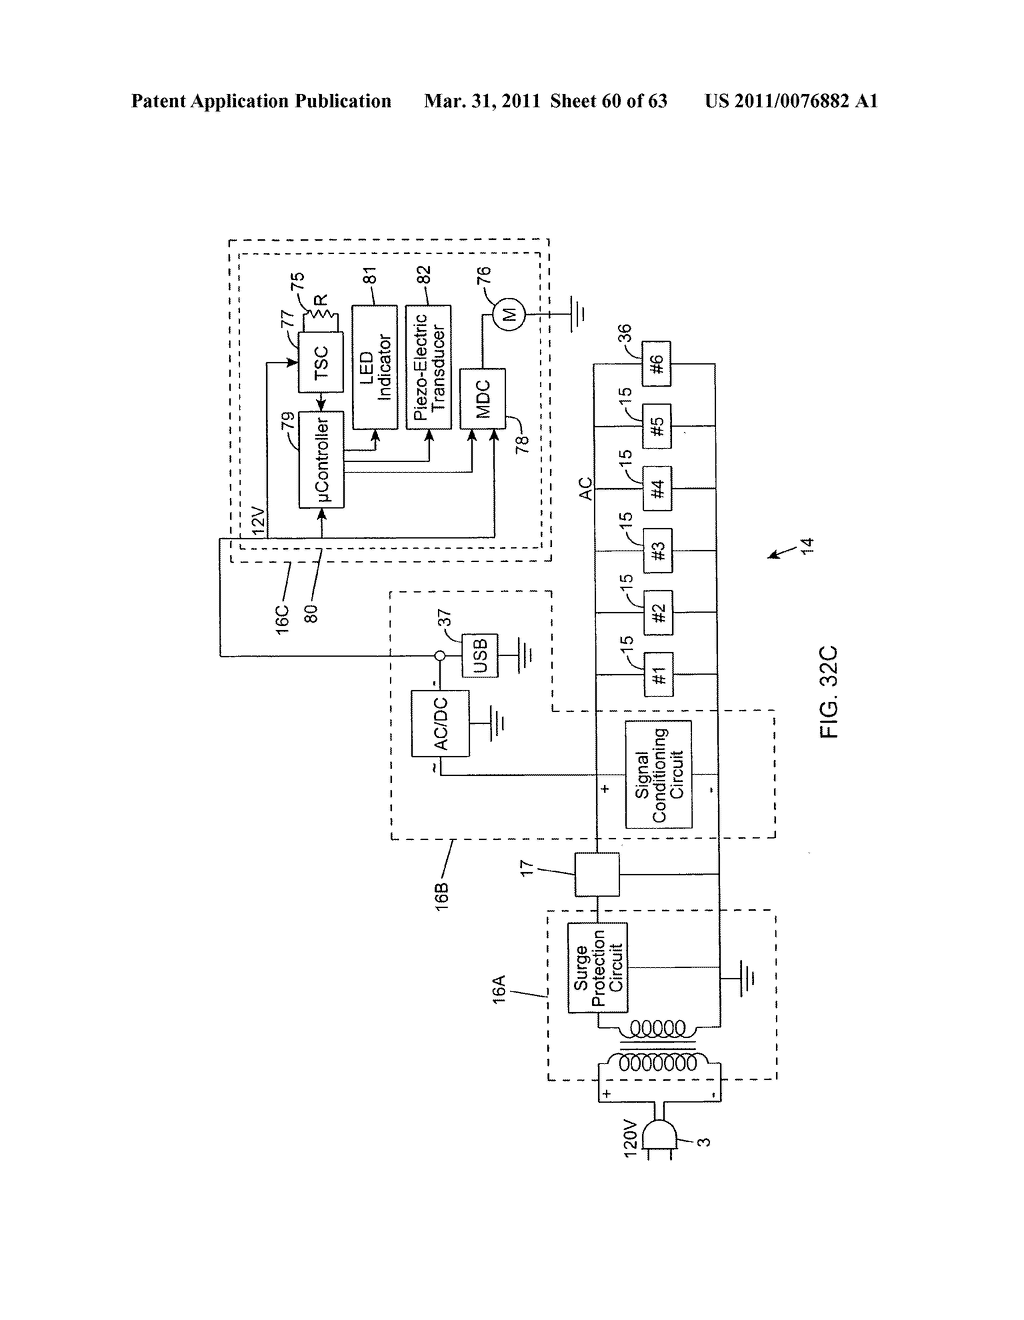 Wall-mountable electrical power supplying device having a ring-like structure for receiving the power plugs and/or power adapters associated with a plurality of electrical appliances, and a housing containing and concealing the same during power supply operations - diagram, schematic, and image 61